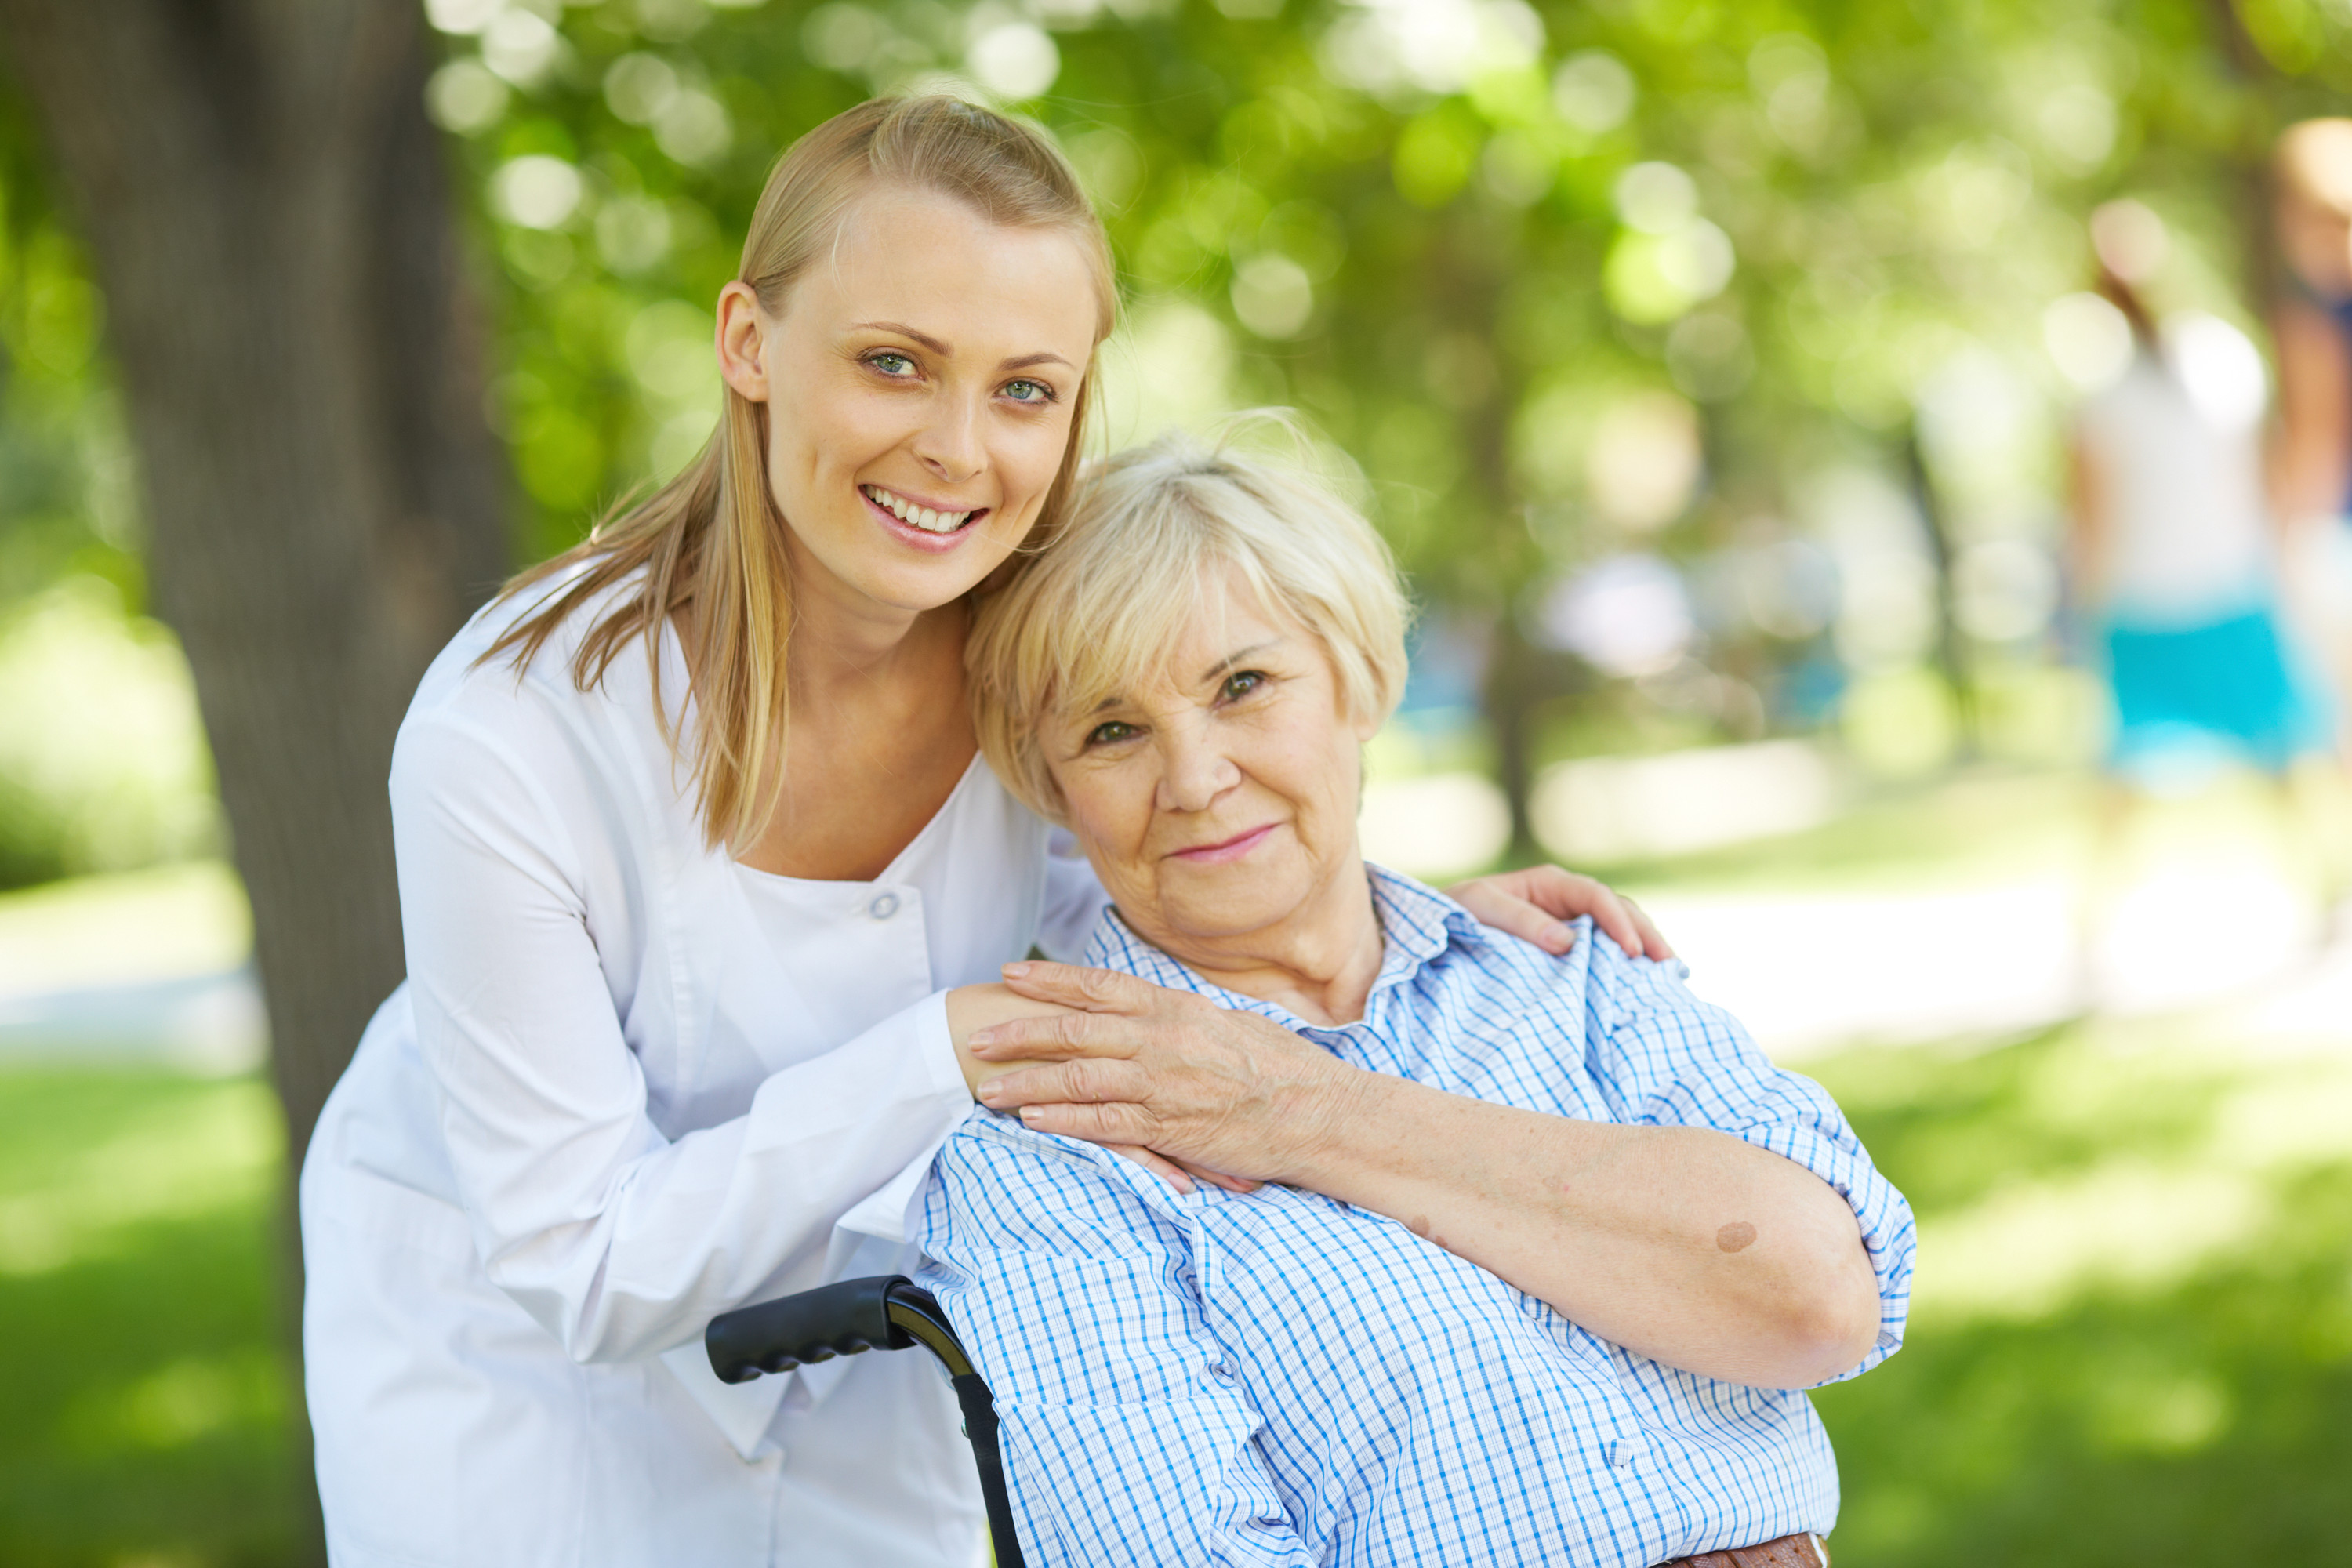 Where to Turn When Caring For Your Aging Parents